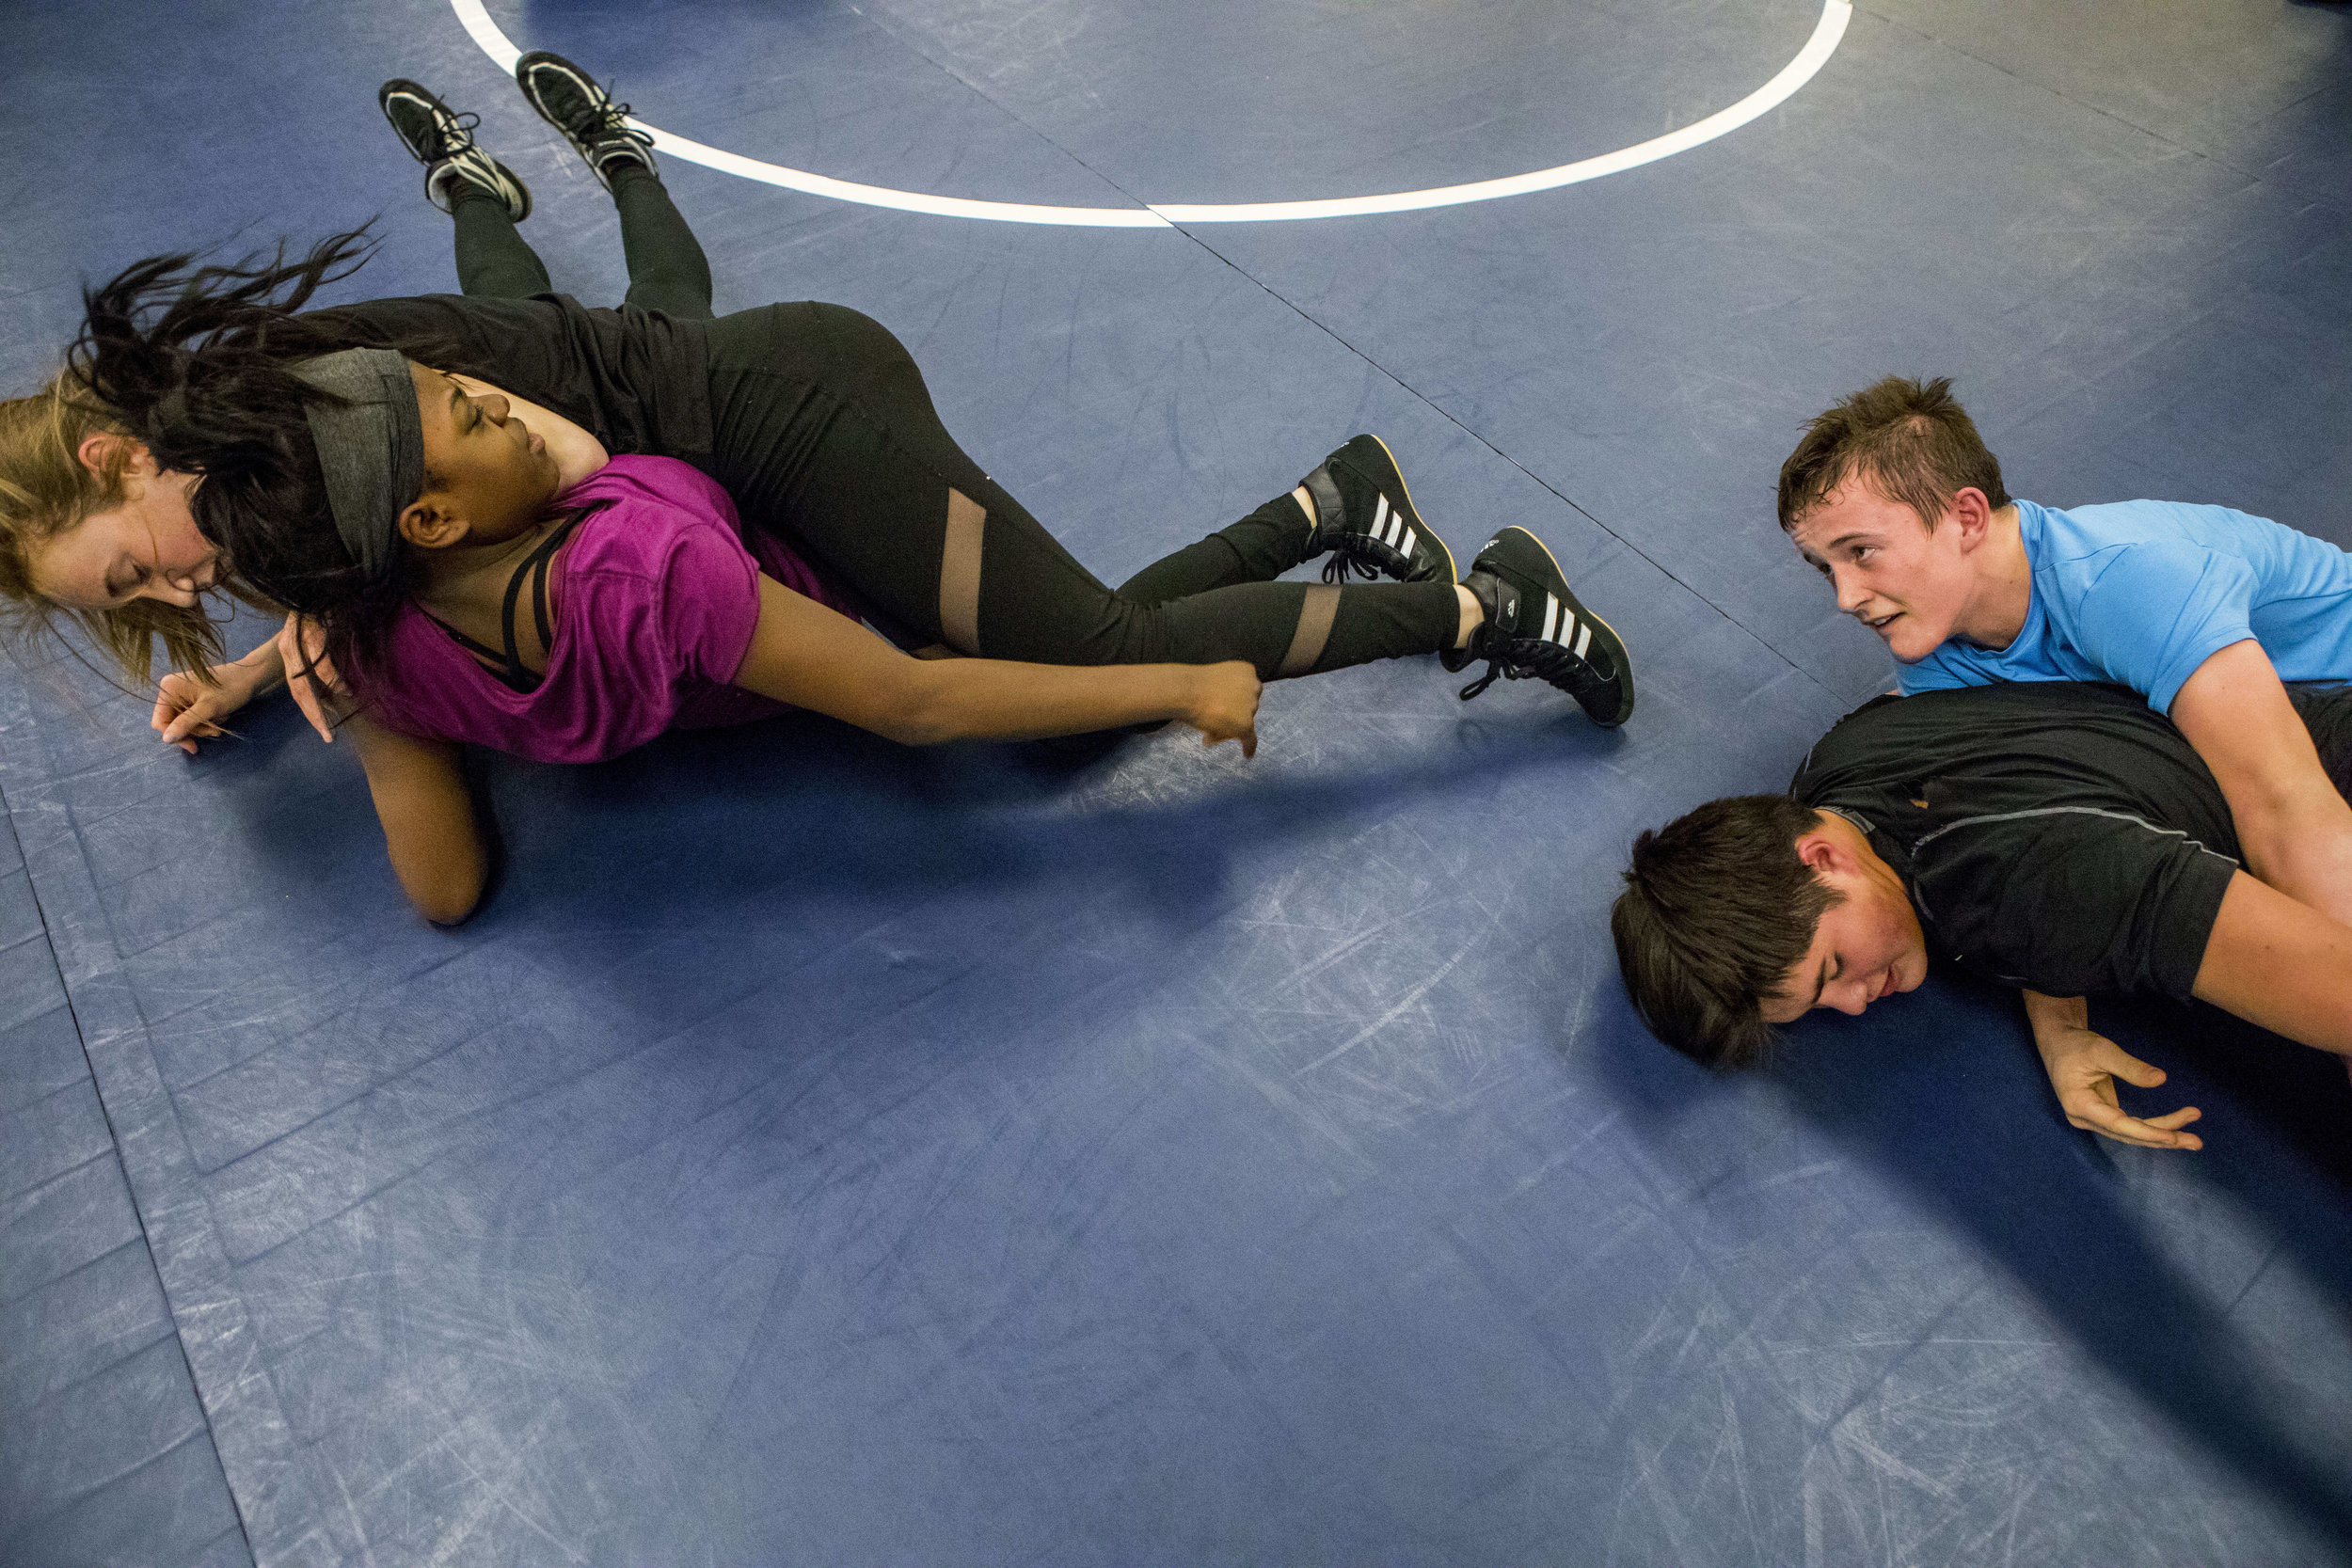  Freshmen Annie Batchen and Elizabeth Jensen, two of four girls on the wrestling team, practice alongside their peers Jack Brown and Henry Hershock during practice in the mezzanine on Feb. 14, 2018 in Jackson, Wyo. 